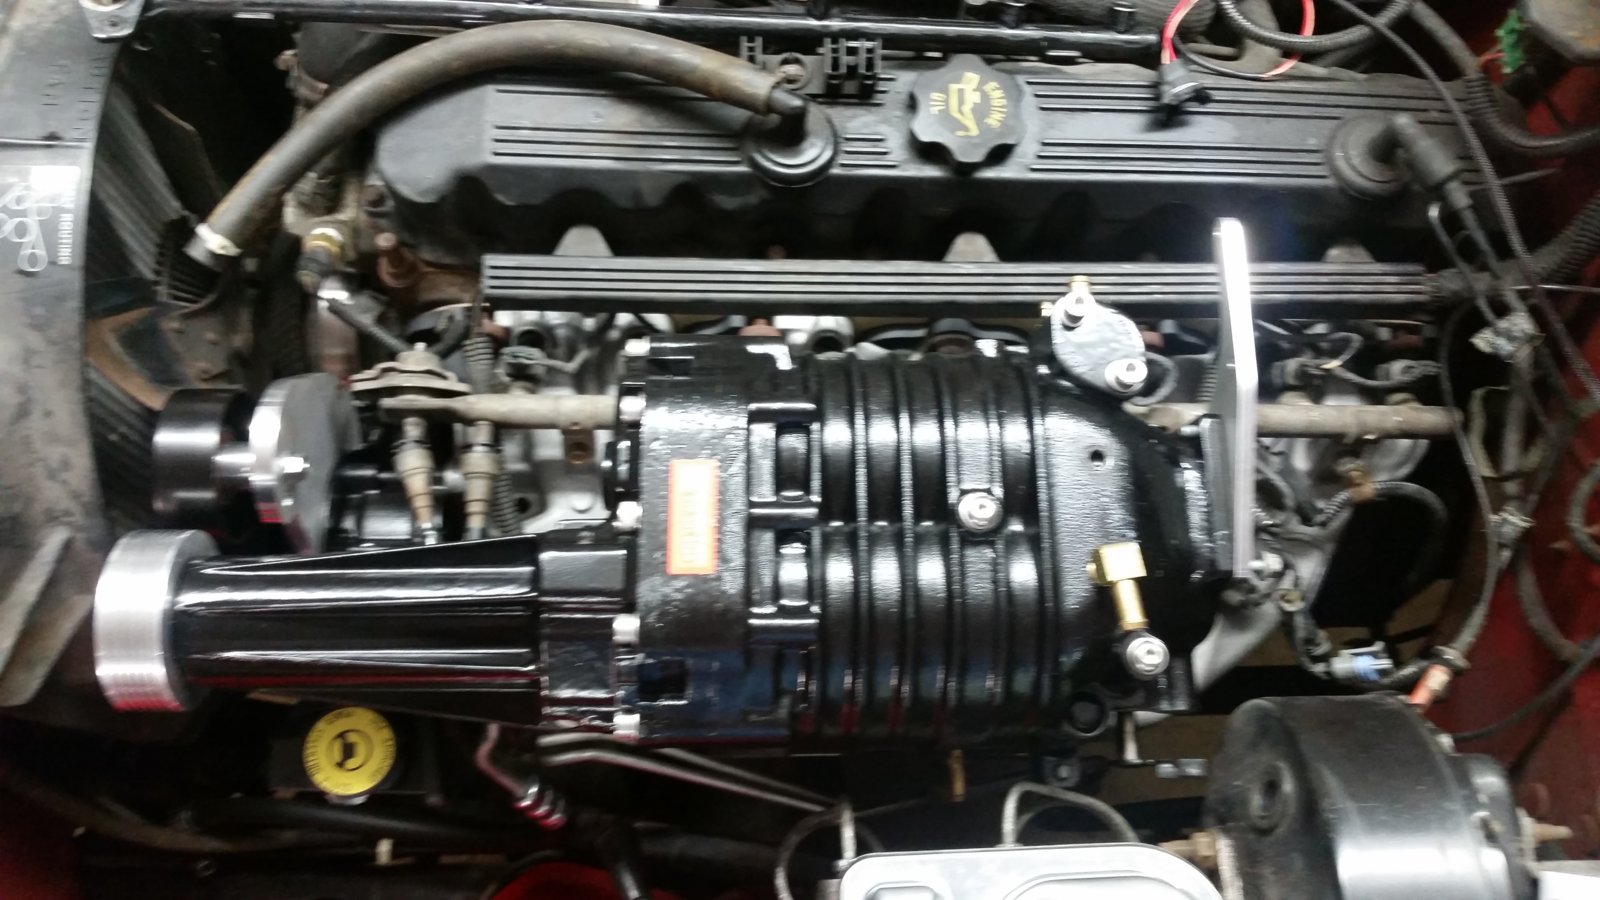 Boosted Technologies Eaton M90 Supercharger Kit Jeep.